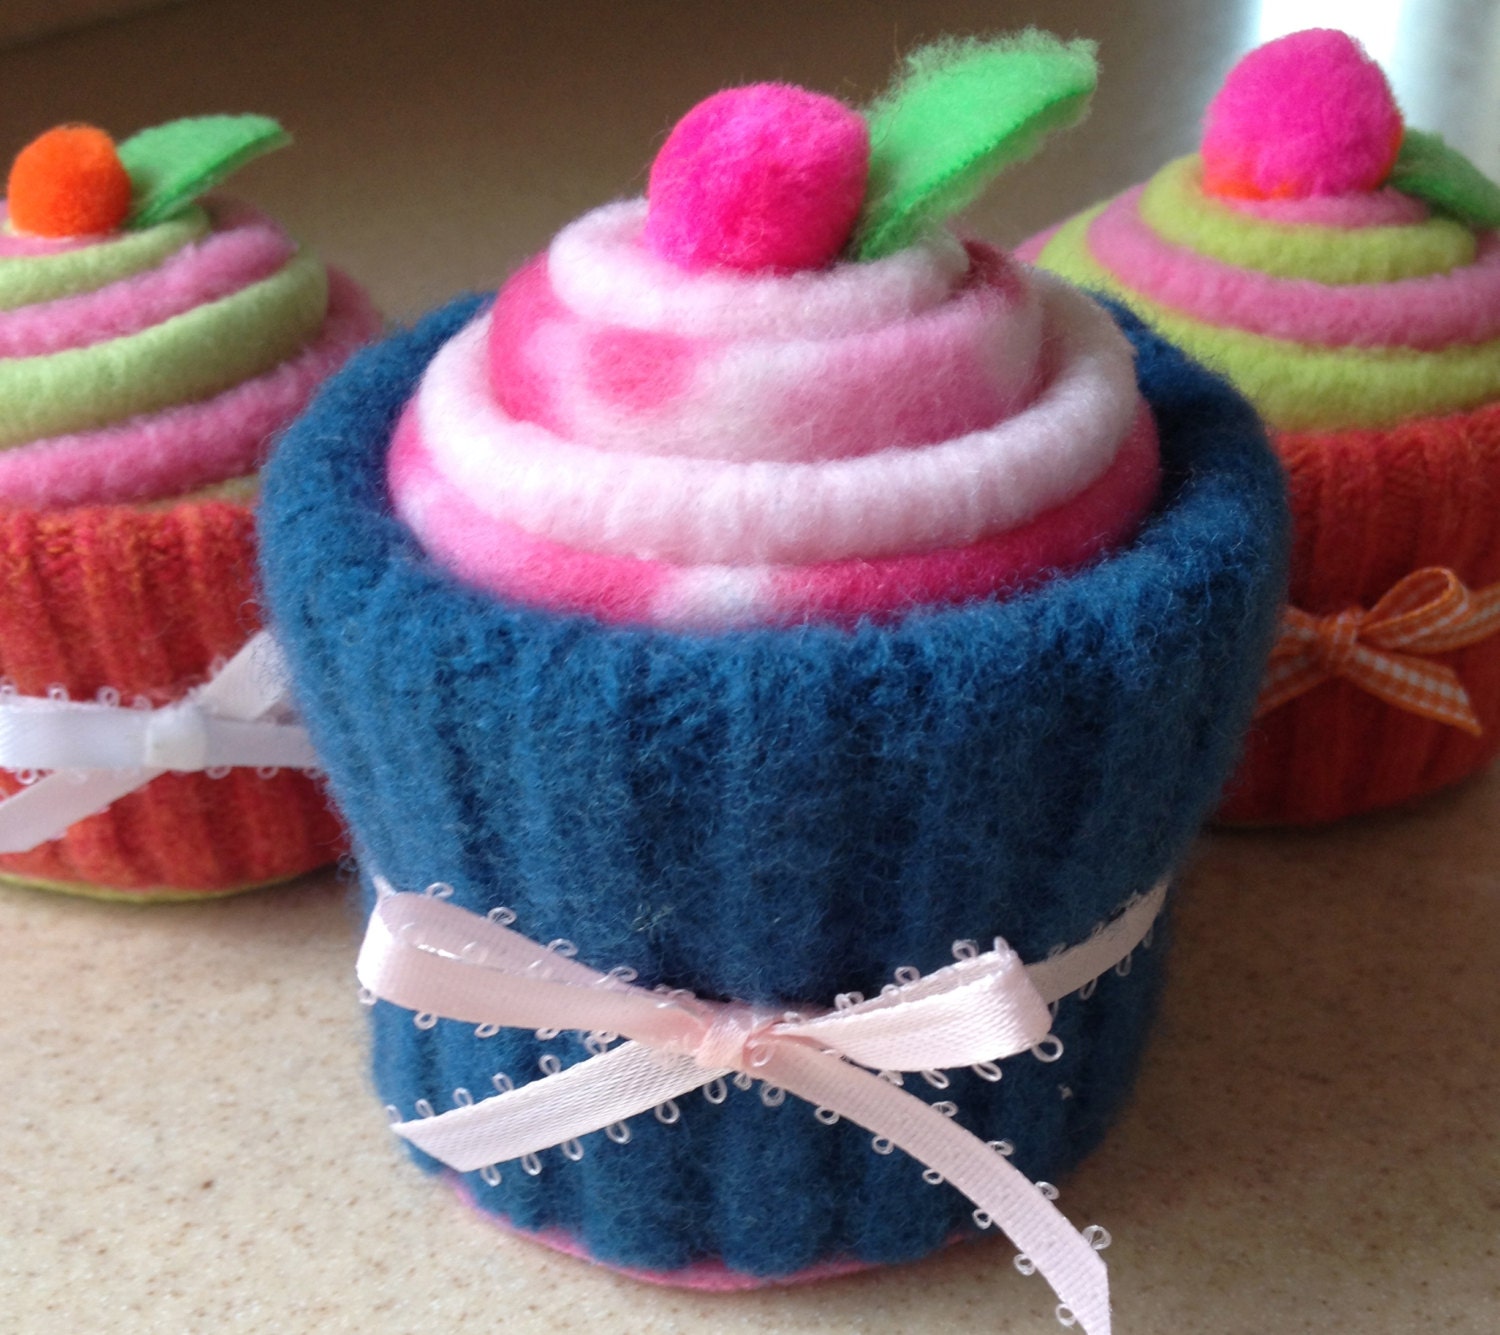 Upcycled play food cupcake or pincushion by TheSweetBeanBoutique